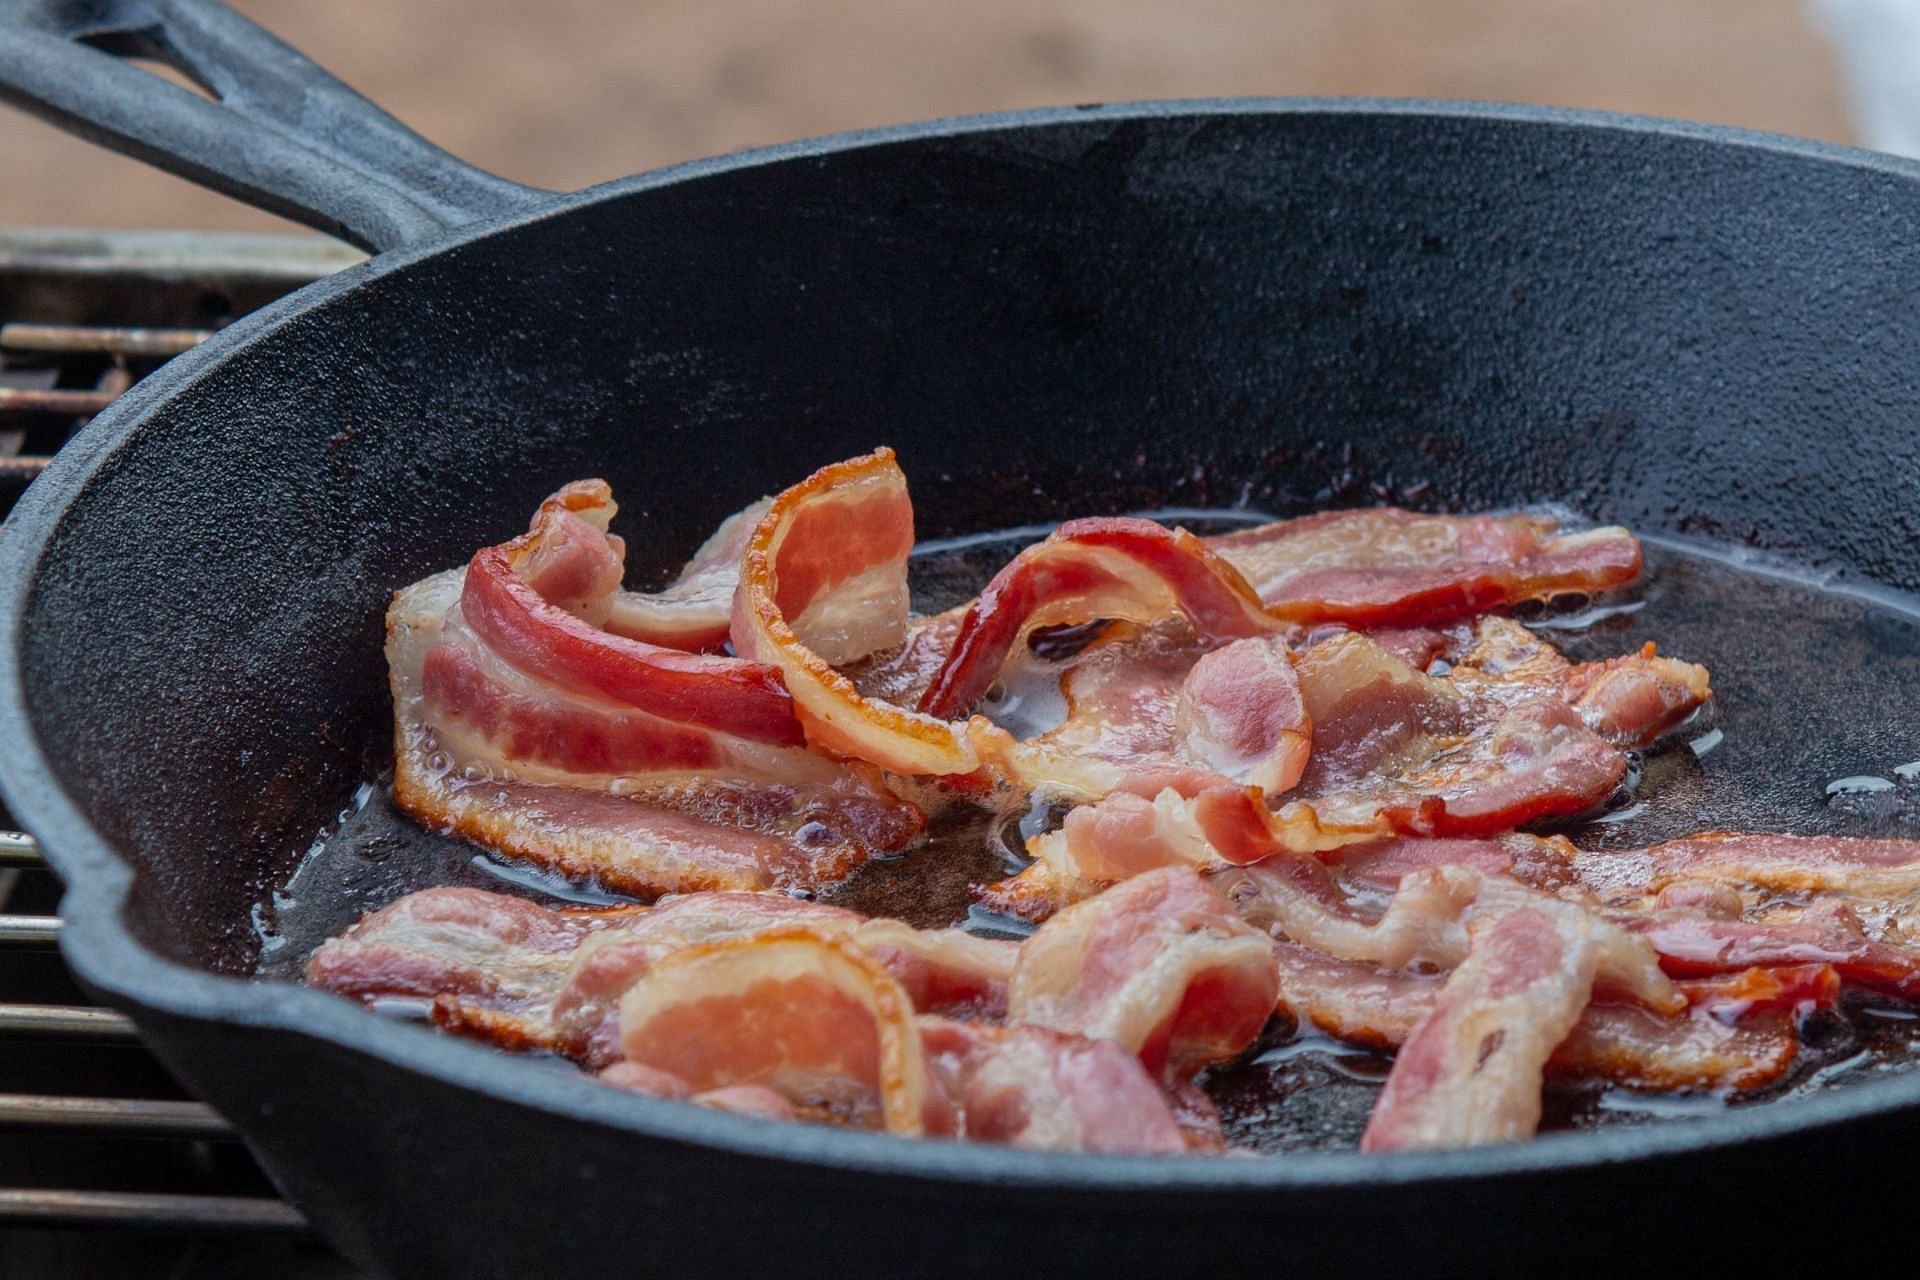 Calories in Bacon depend on the type also. (Image via Unsplash/ Michelle Shelly Captures)